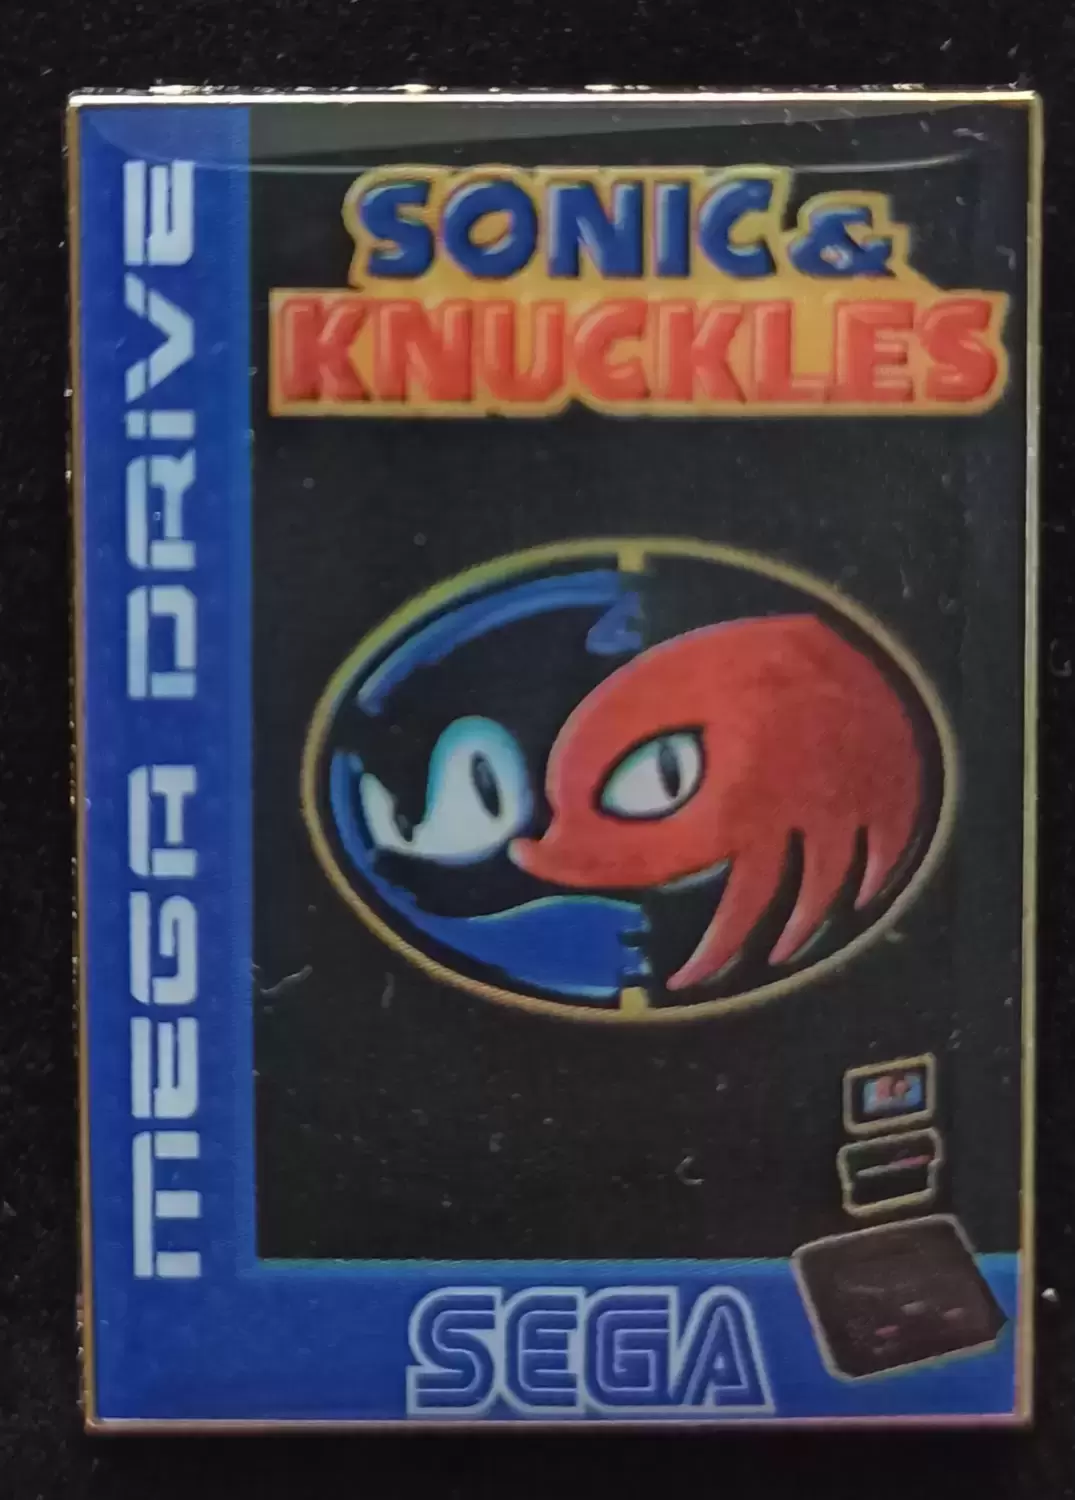 Sonic the Hedgehog - Retro pin badge collection - Megadrive - Sonic & Knuckles